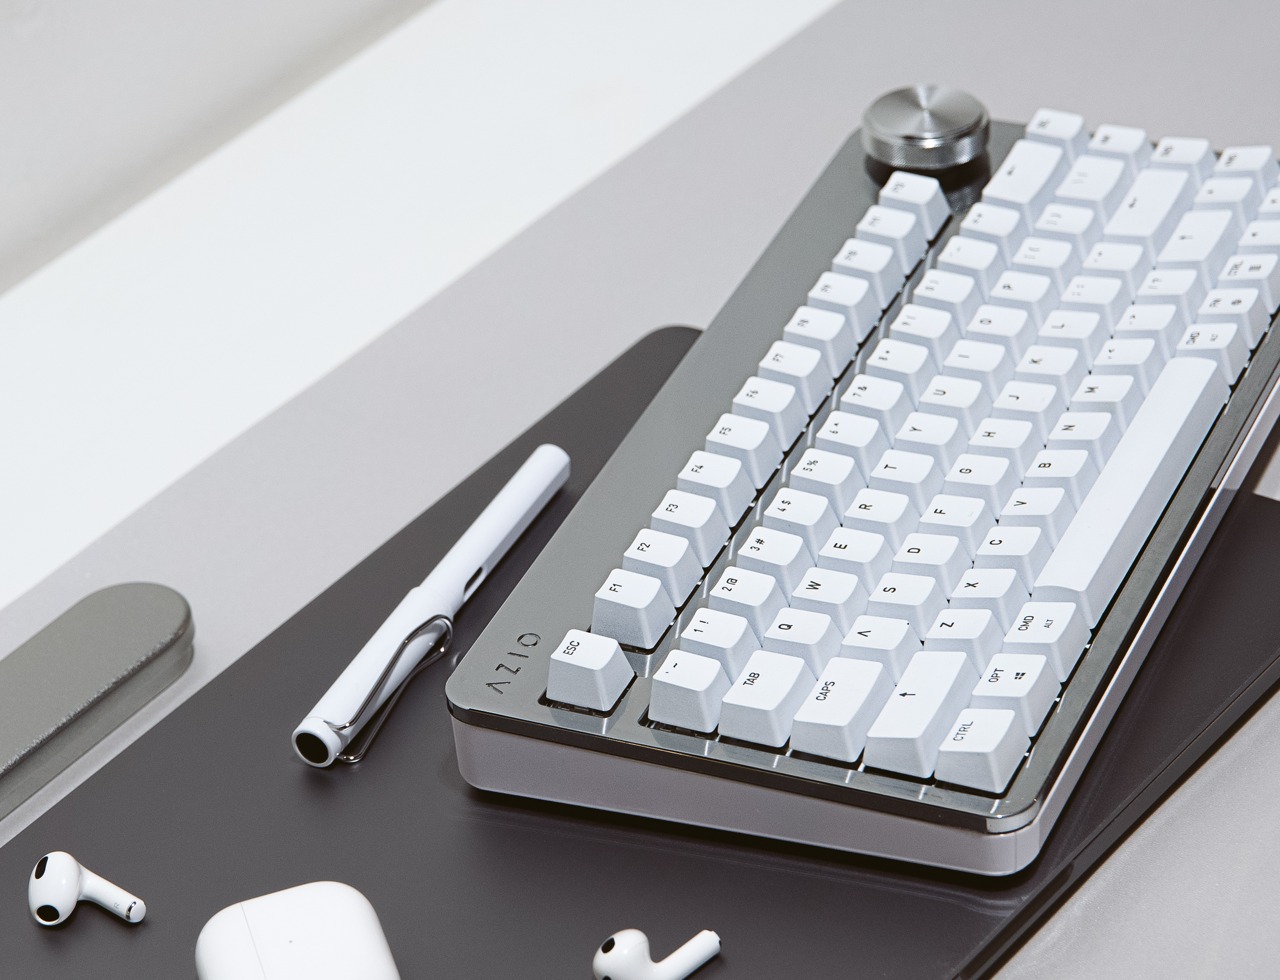 Ever wanted a concrete or aluminum faceplate keyboard? Say hello to the Tera 75 mechanical keyboard with custom fascias